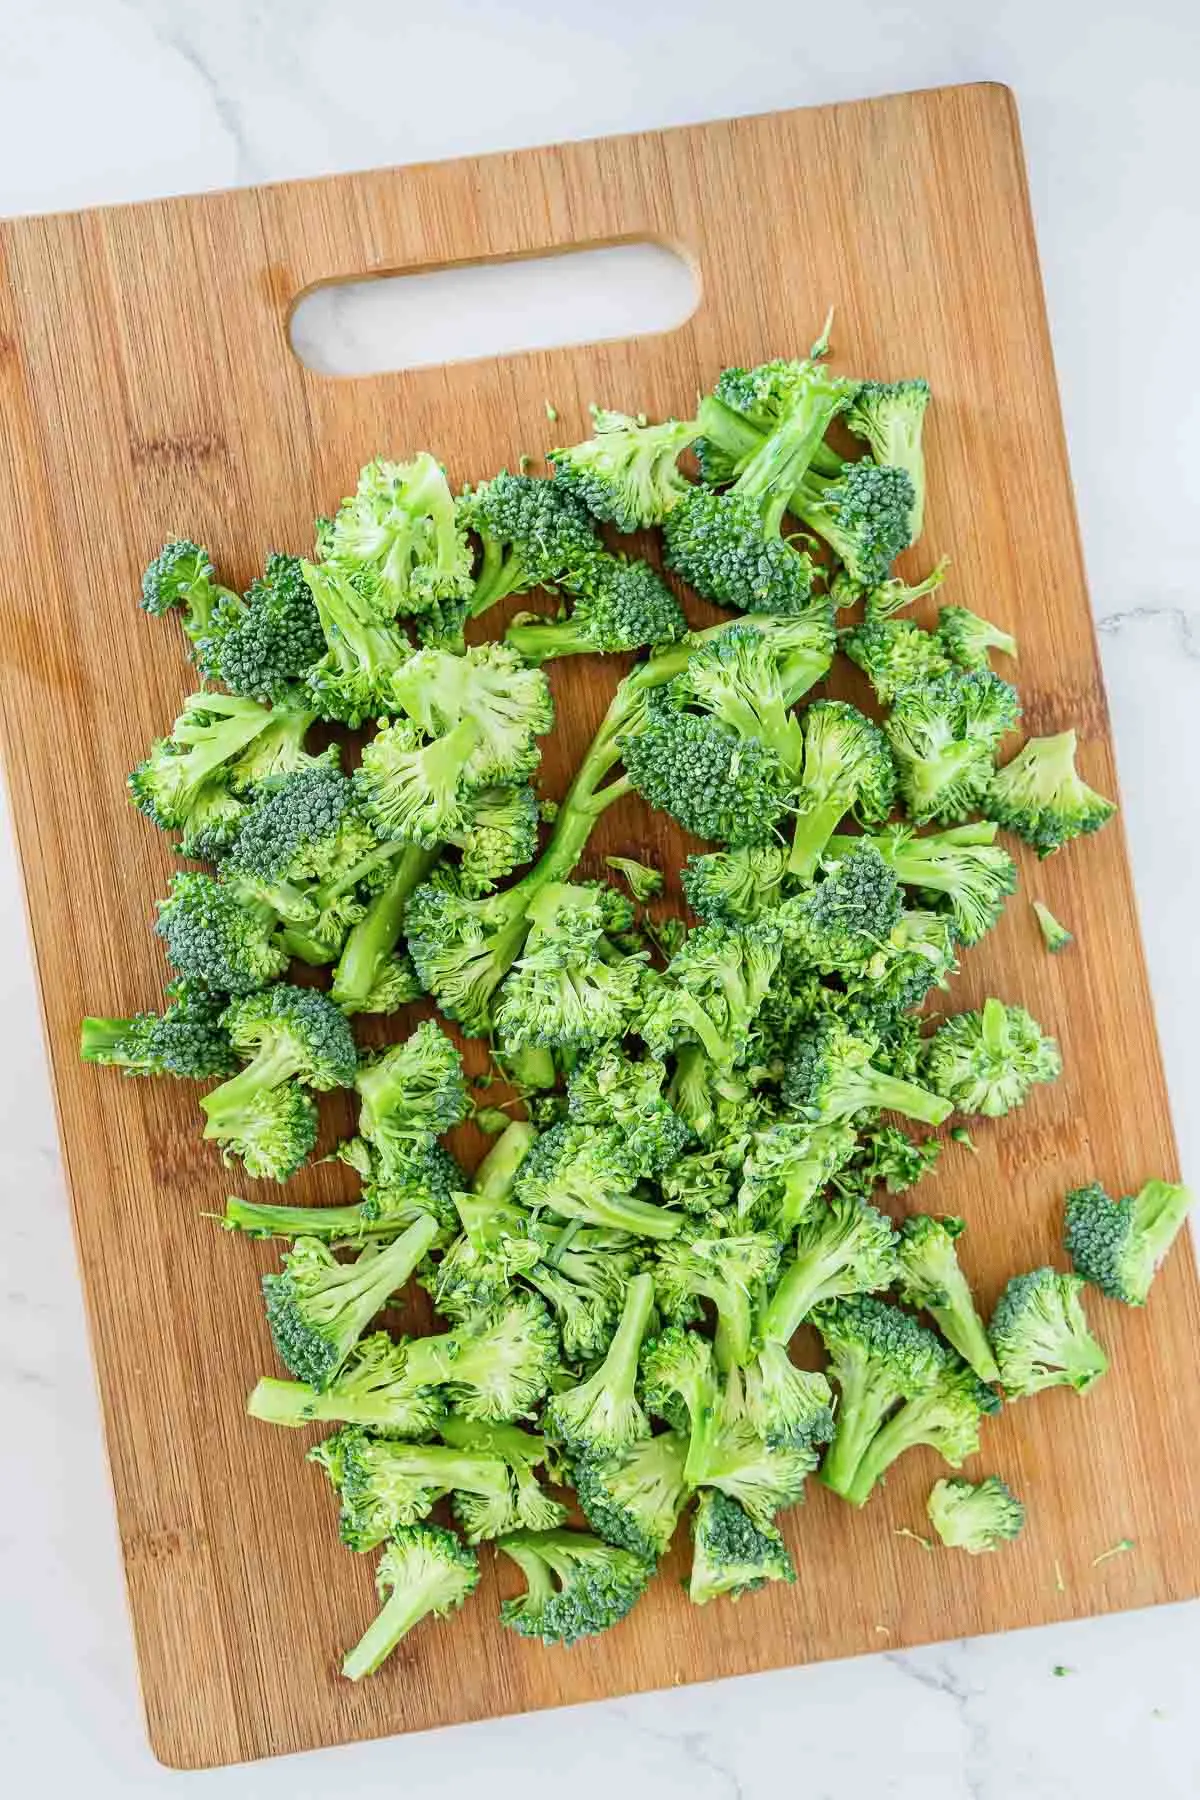 Broccoli florets cut into small pieces on a cutting board.